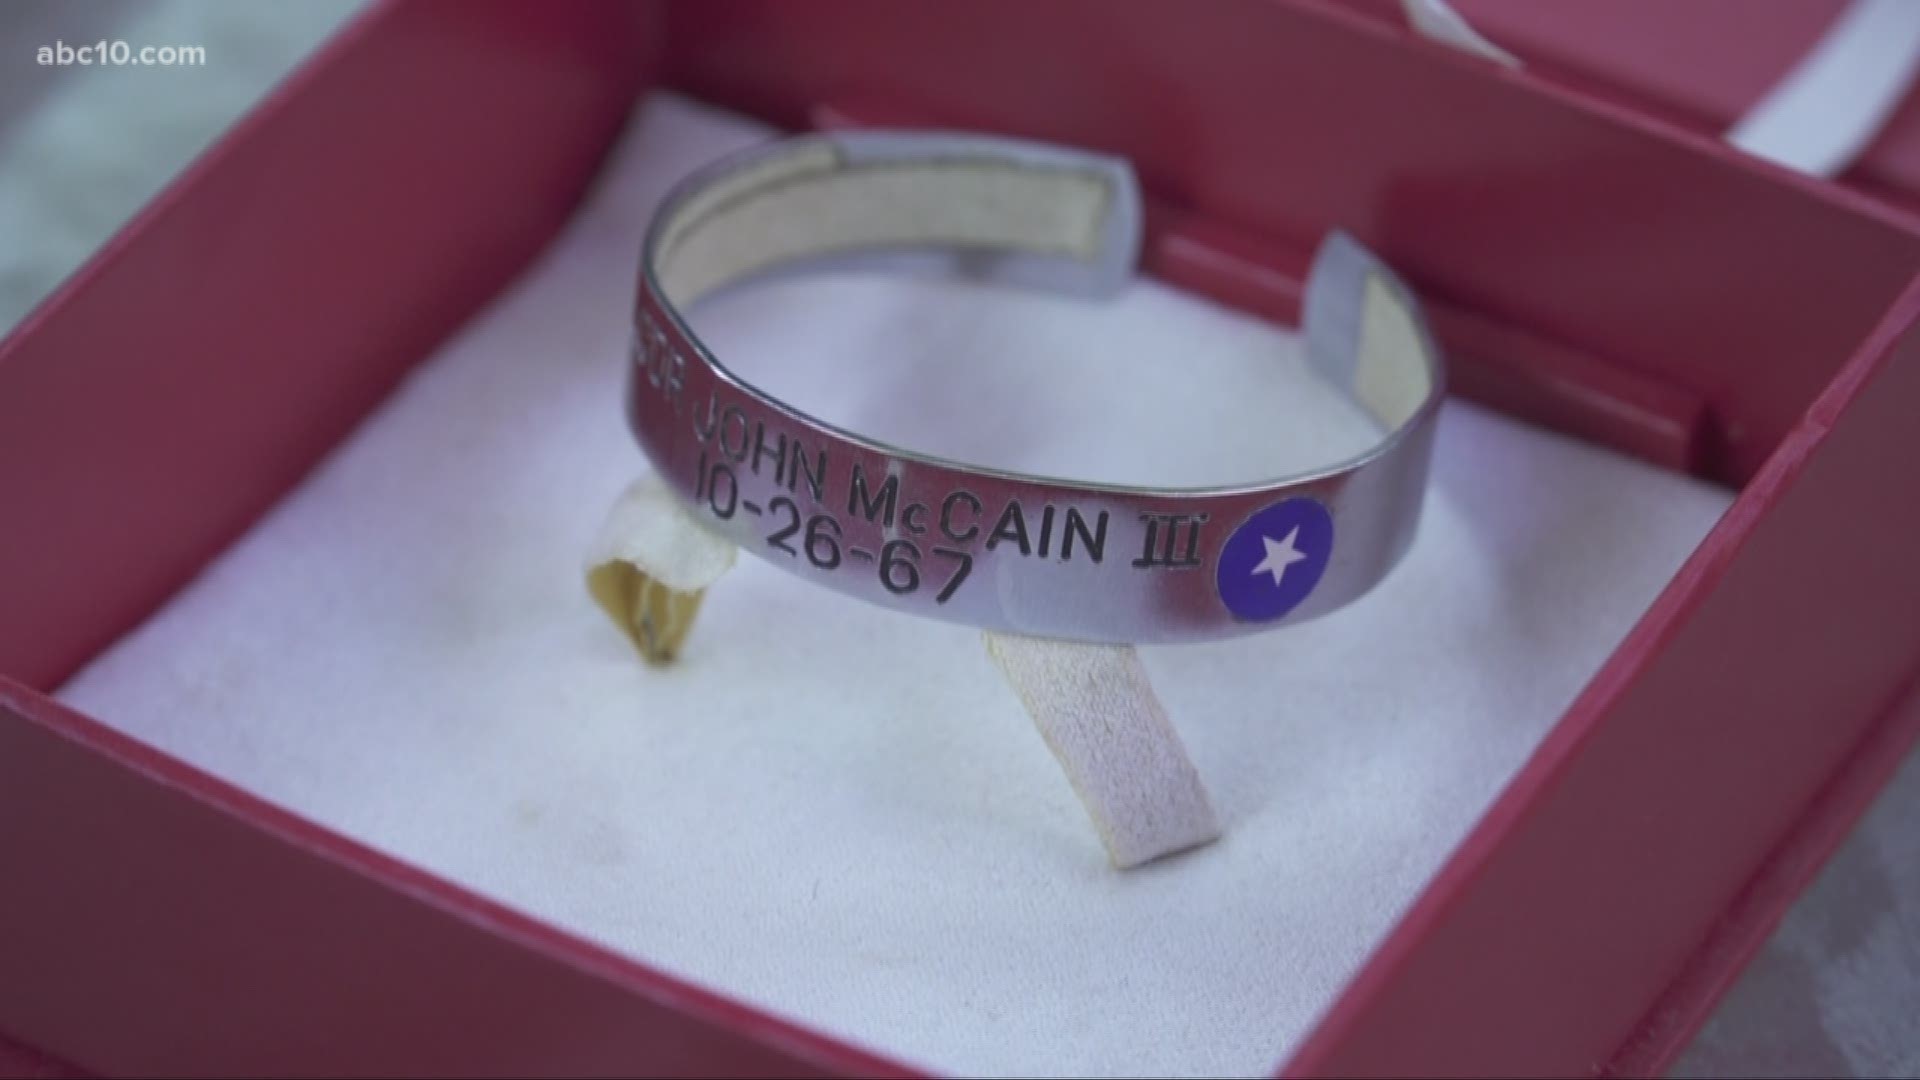 In the early 1970's, more than 5 million bracelets were sold to Americans with the names of soldiers who were captured or missing during the Vietnam War. Sue London bought one of those bracelets when she was 10-years-old. It was Sen. John McCain's.